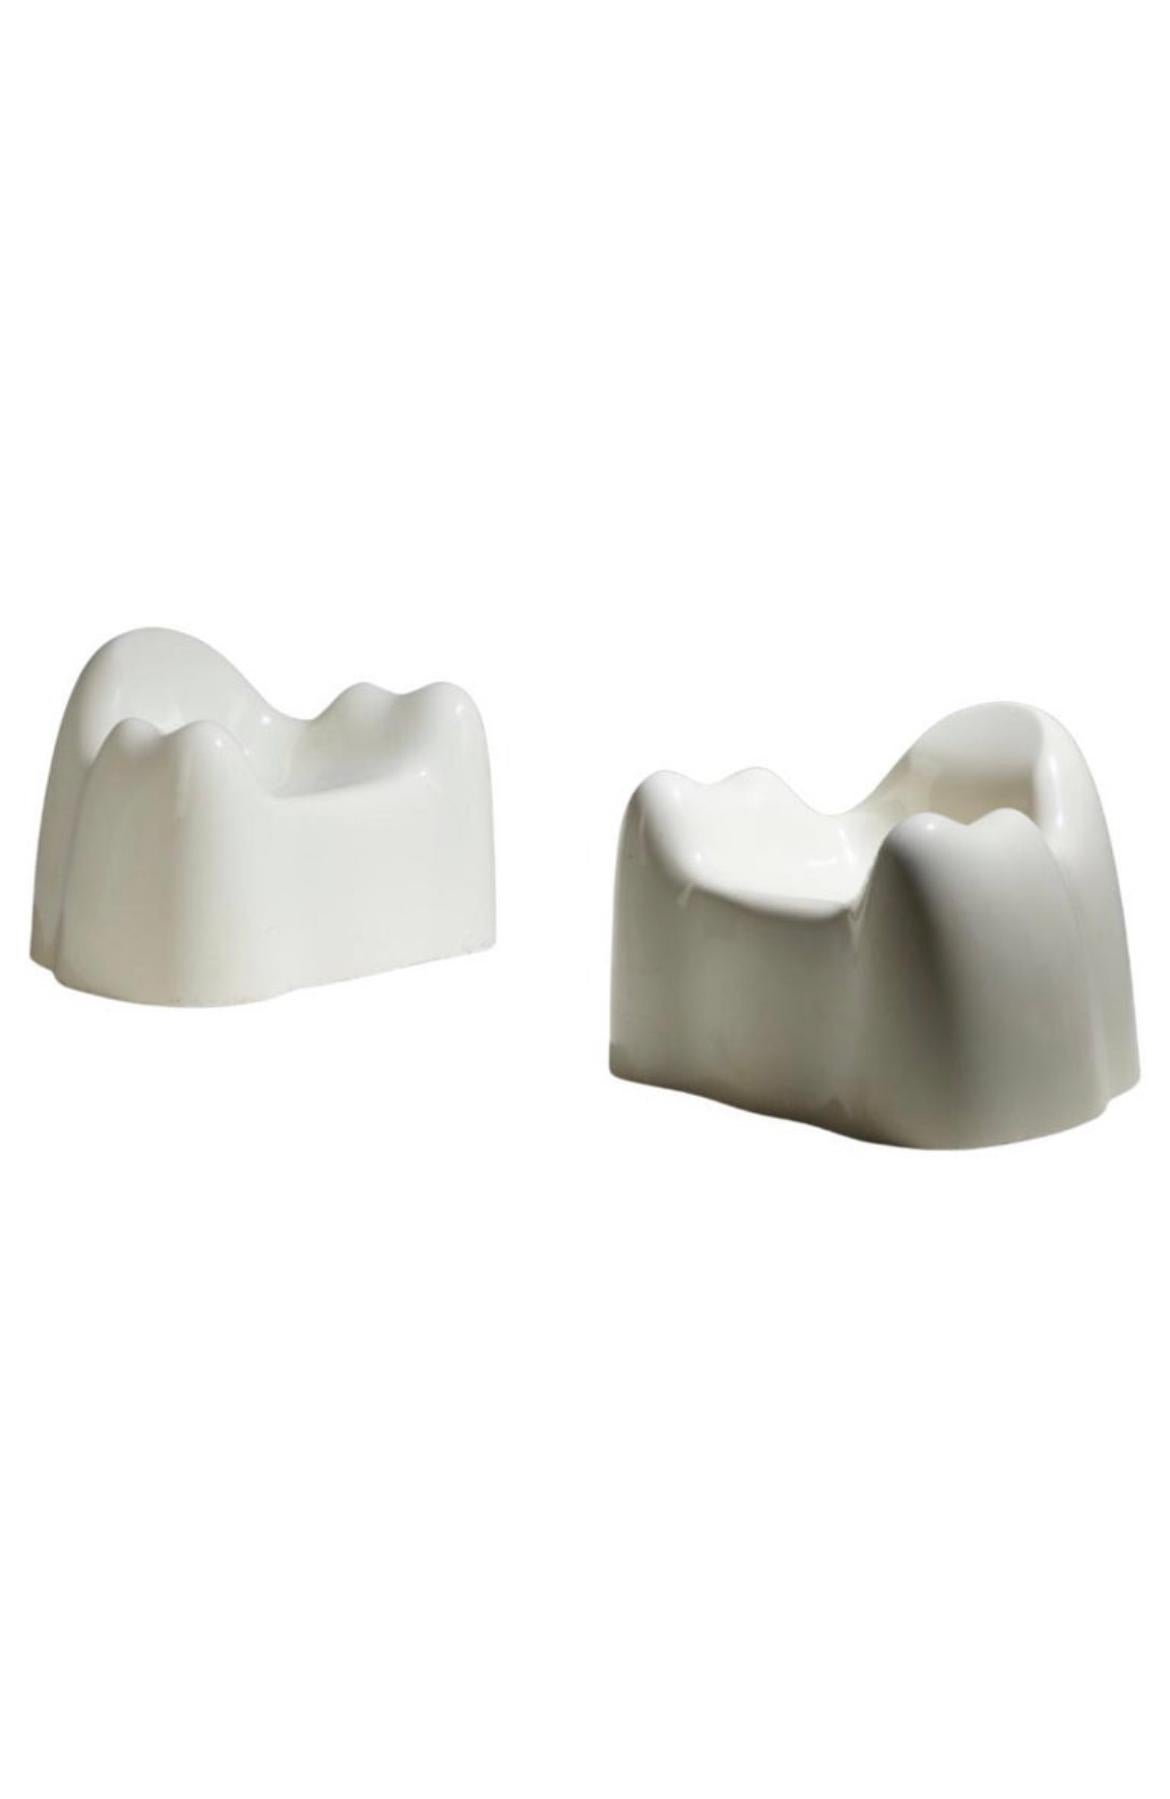 Three Molar chairs by Wendell Castle, USA, 1969. Gel-coated fiberglass and vinyl, in great condition. 
This work is part of the open-editioned Molar series and the model registered with the artist's studio as number 13. 

Can be purchased as a